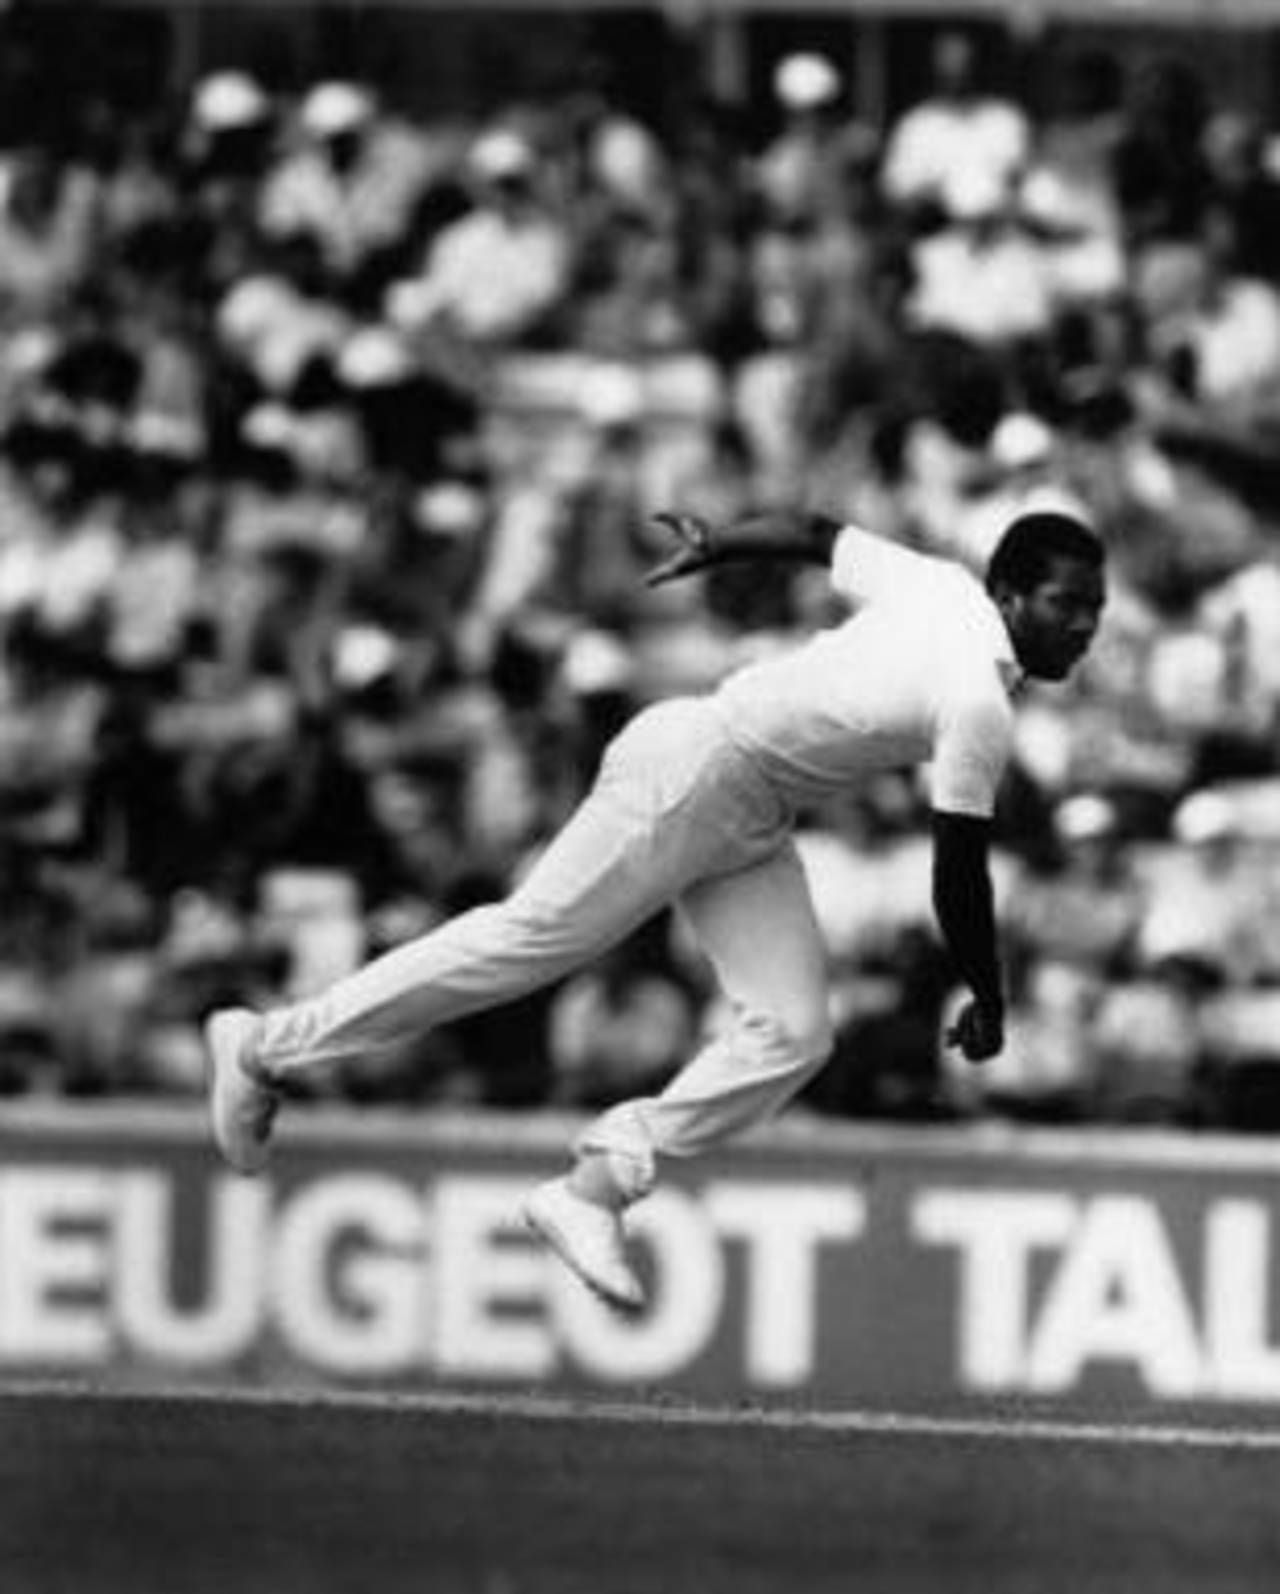 Malcolm Marshall bowls, England v West Indies, fifth Test, The Oval, 14 August 1984